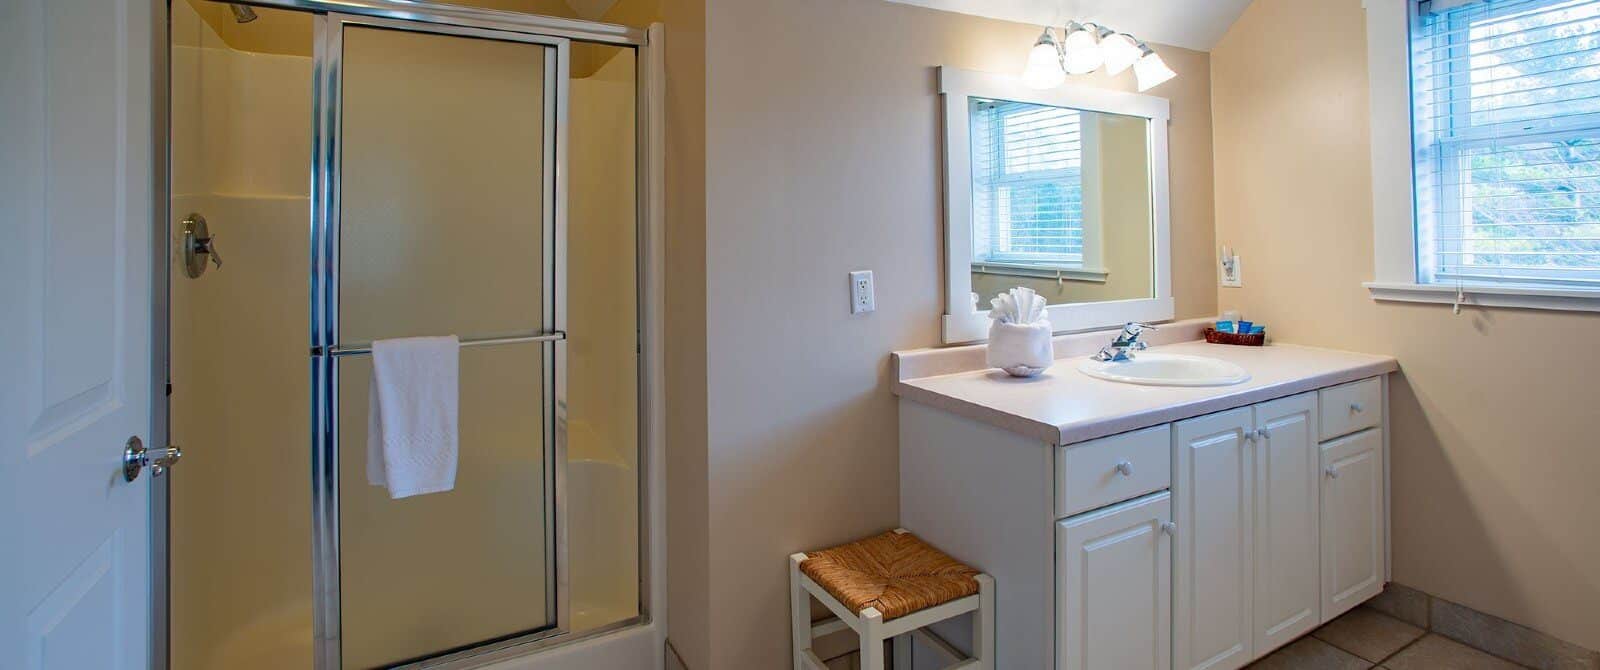 Bathroom with single sink vanity, white framed mirror and stand up shower with slider glass door